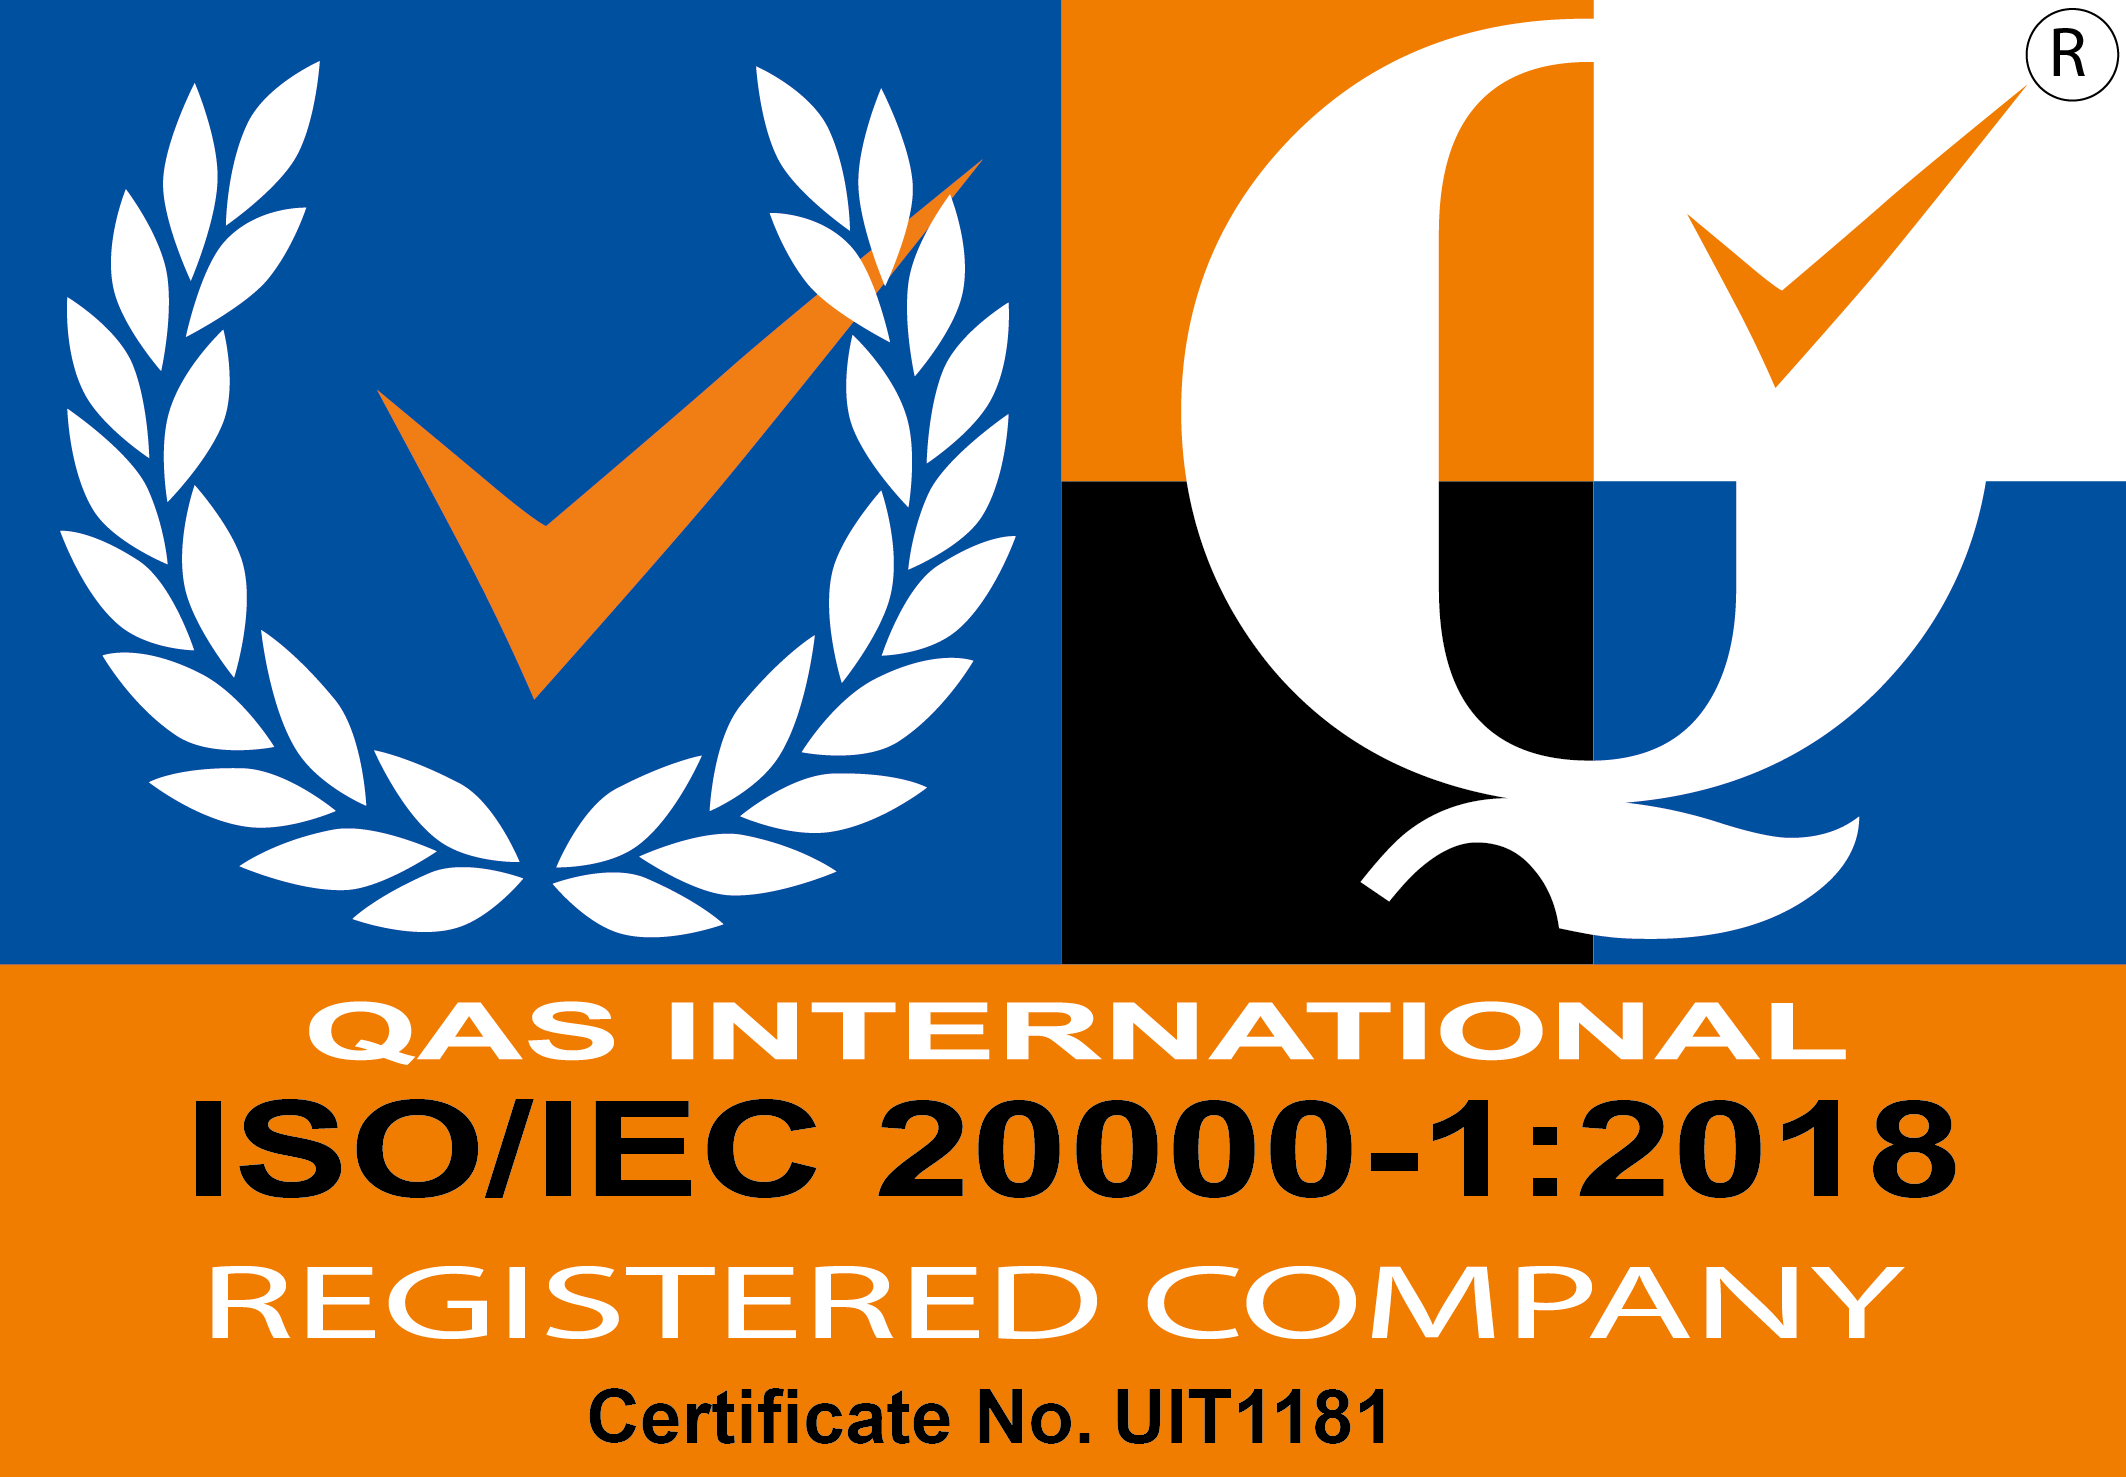 ISO 20000-1:2018 certification